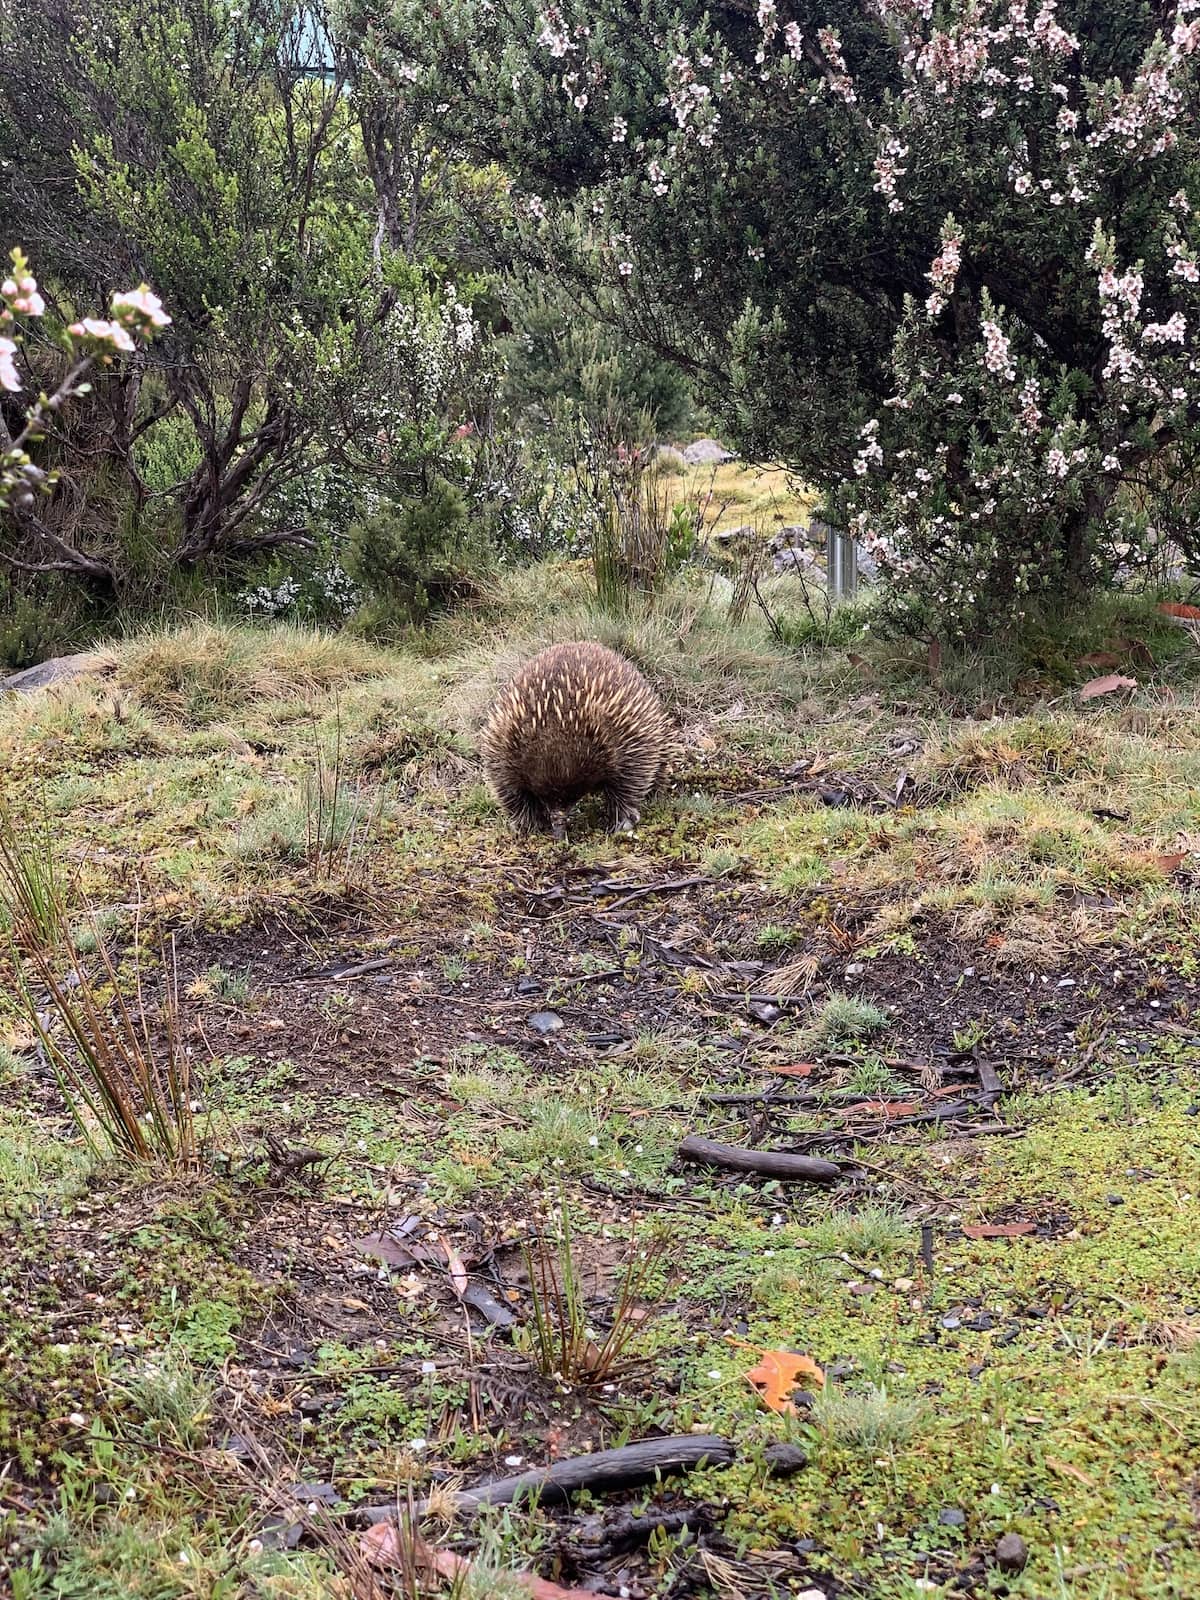 An echidna in grass, with its beak in the ground